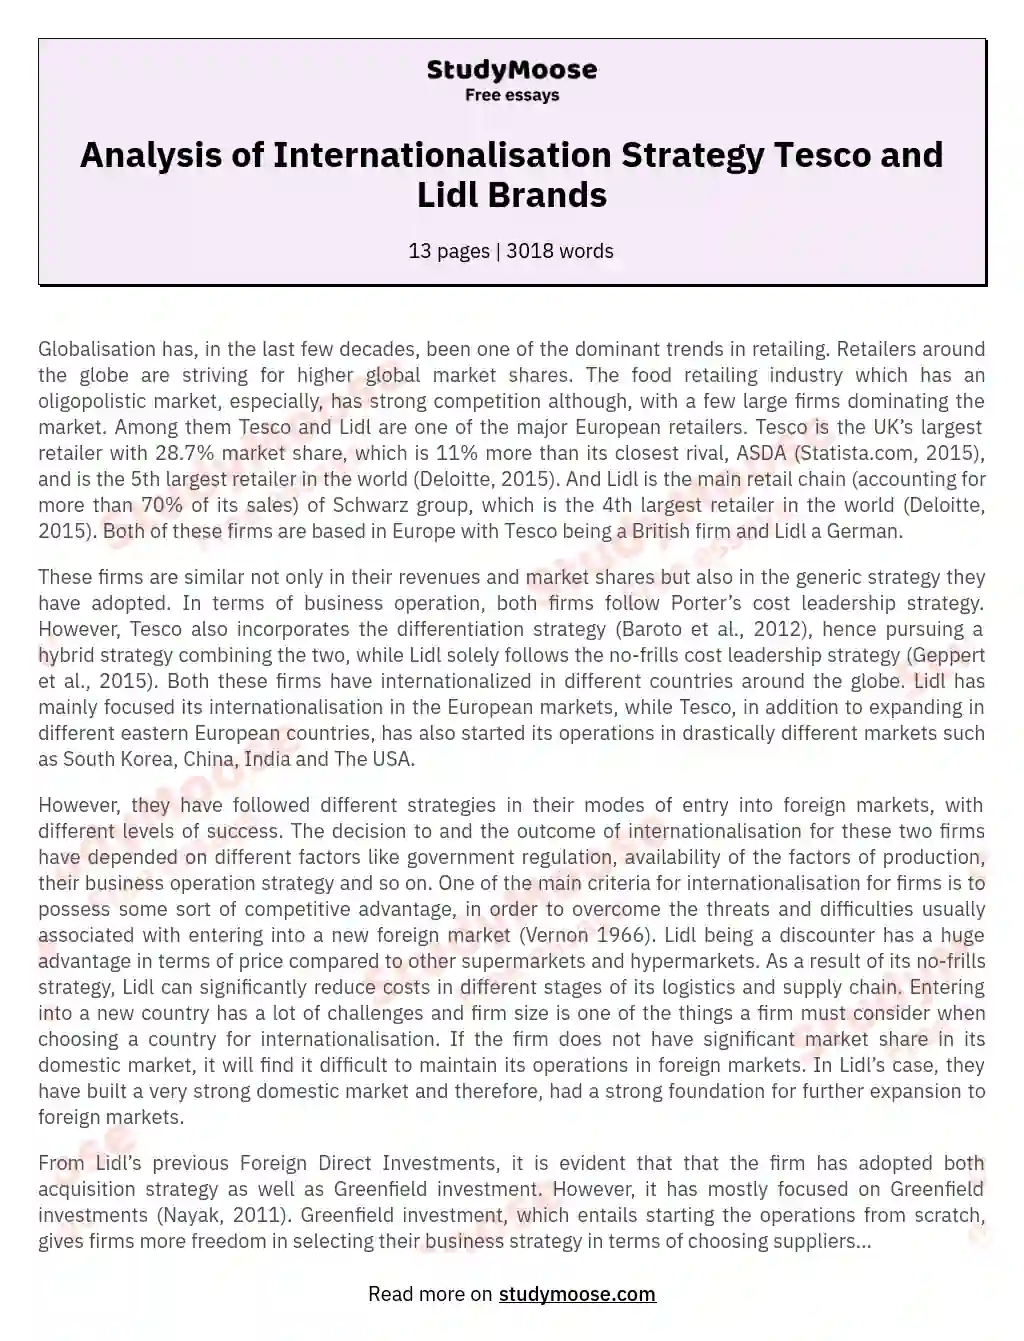 Analysis of Internationalisation Strategy Tesco and Lidl Brands essay